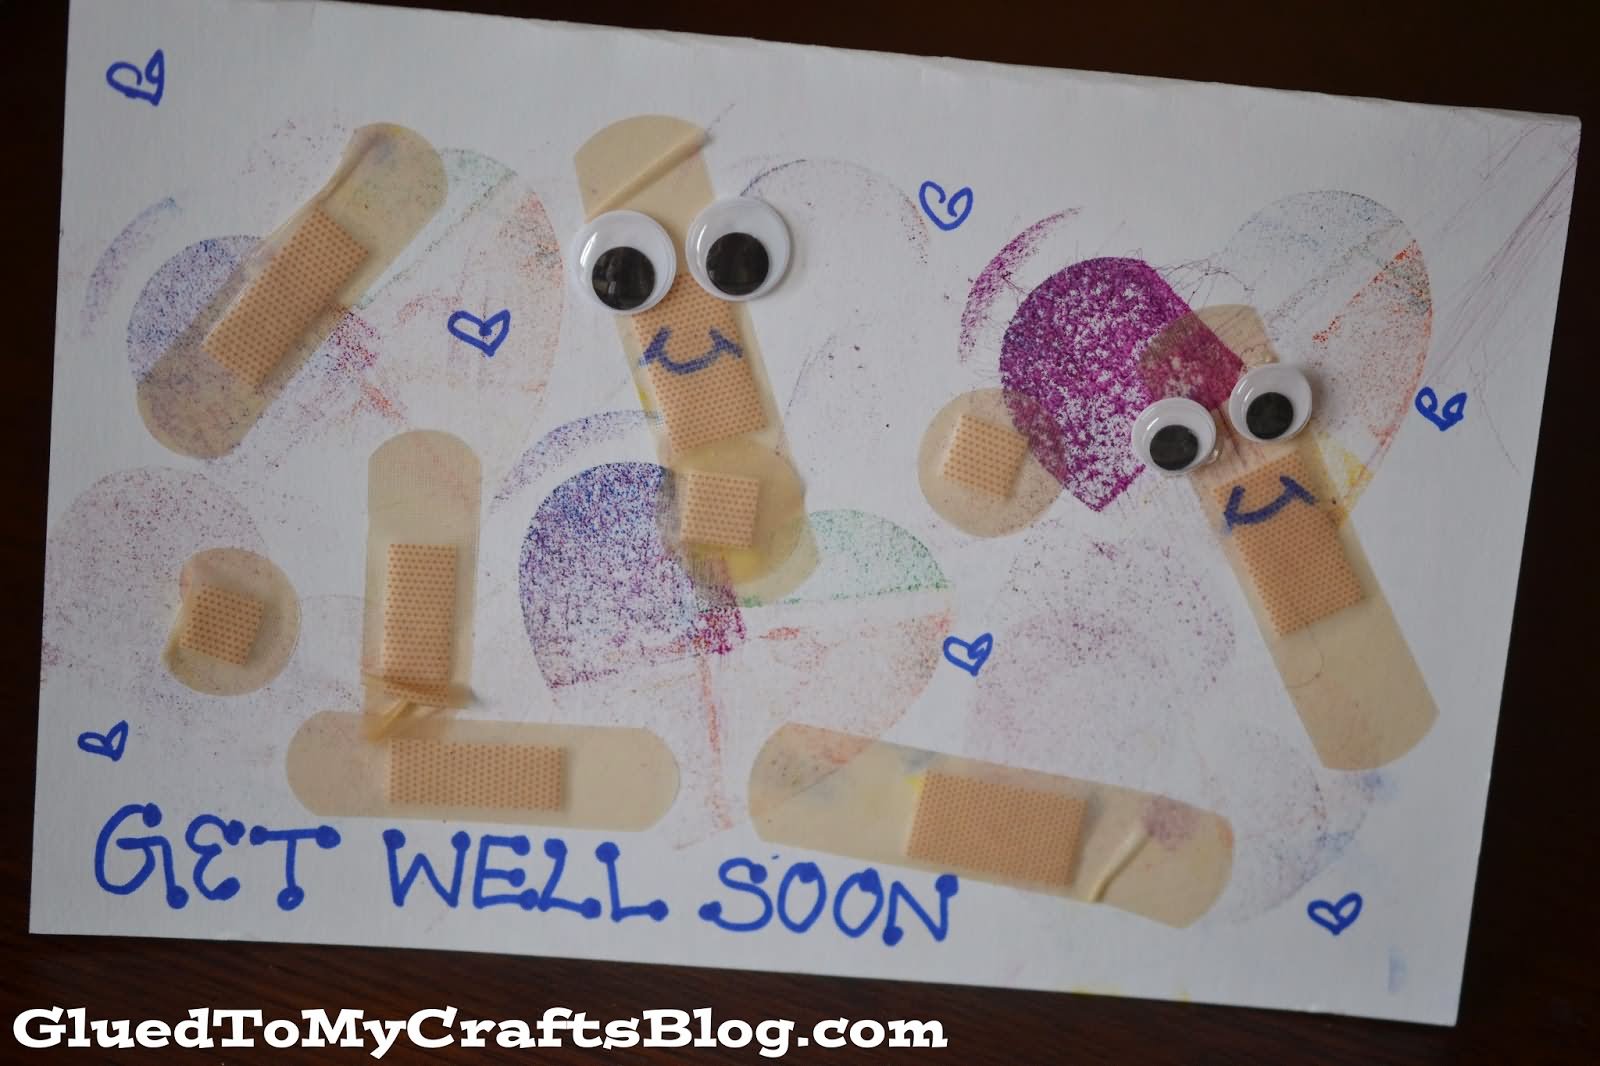 Get Well Soon Band Aids Greeting Card